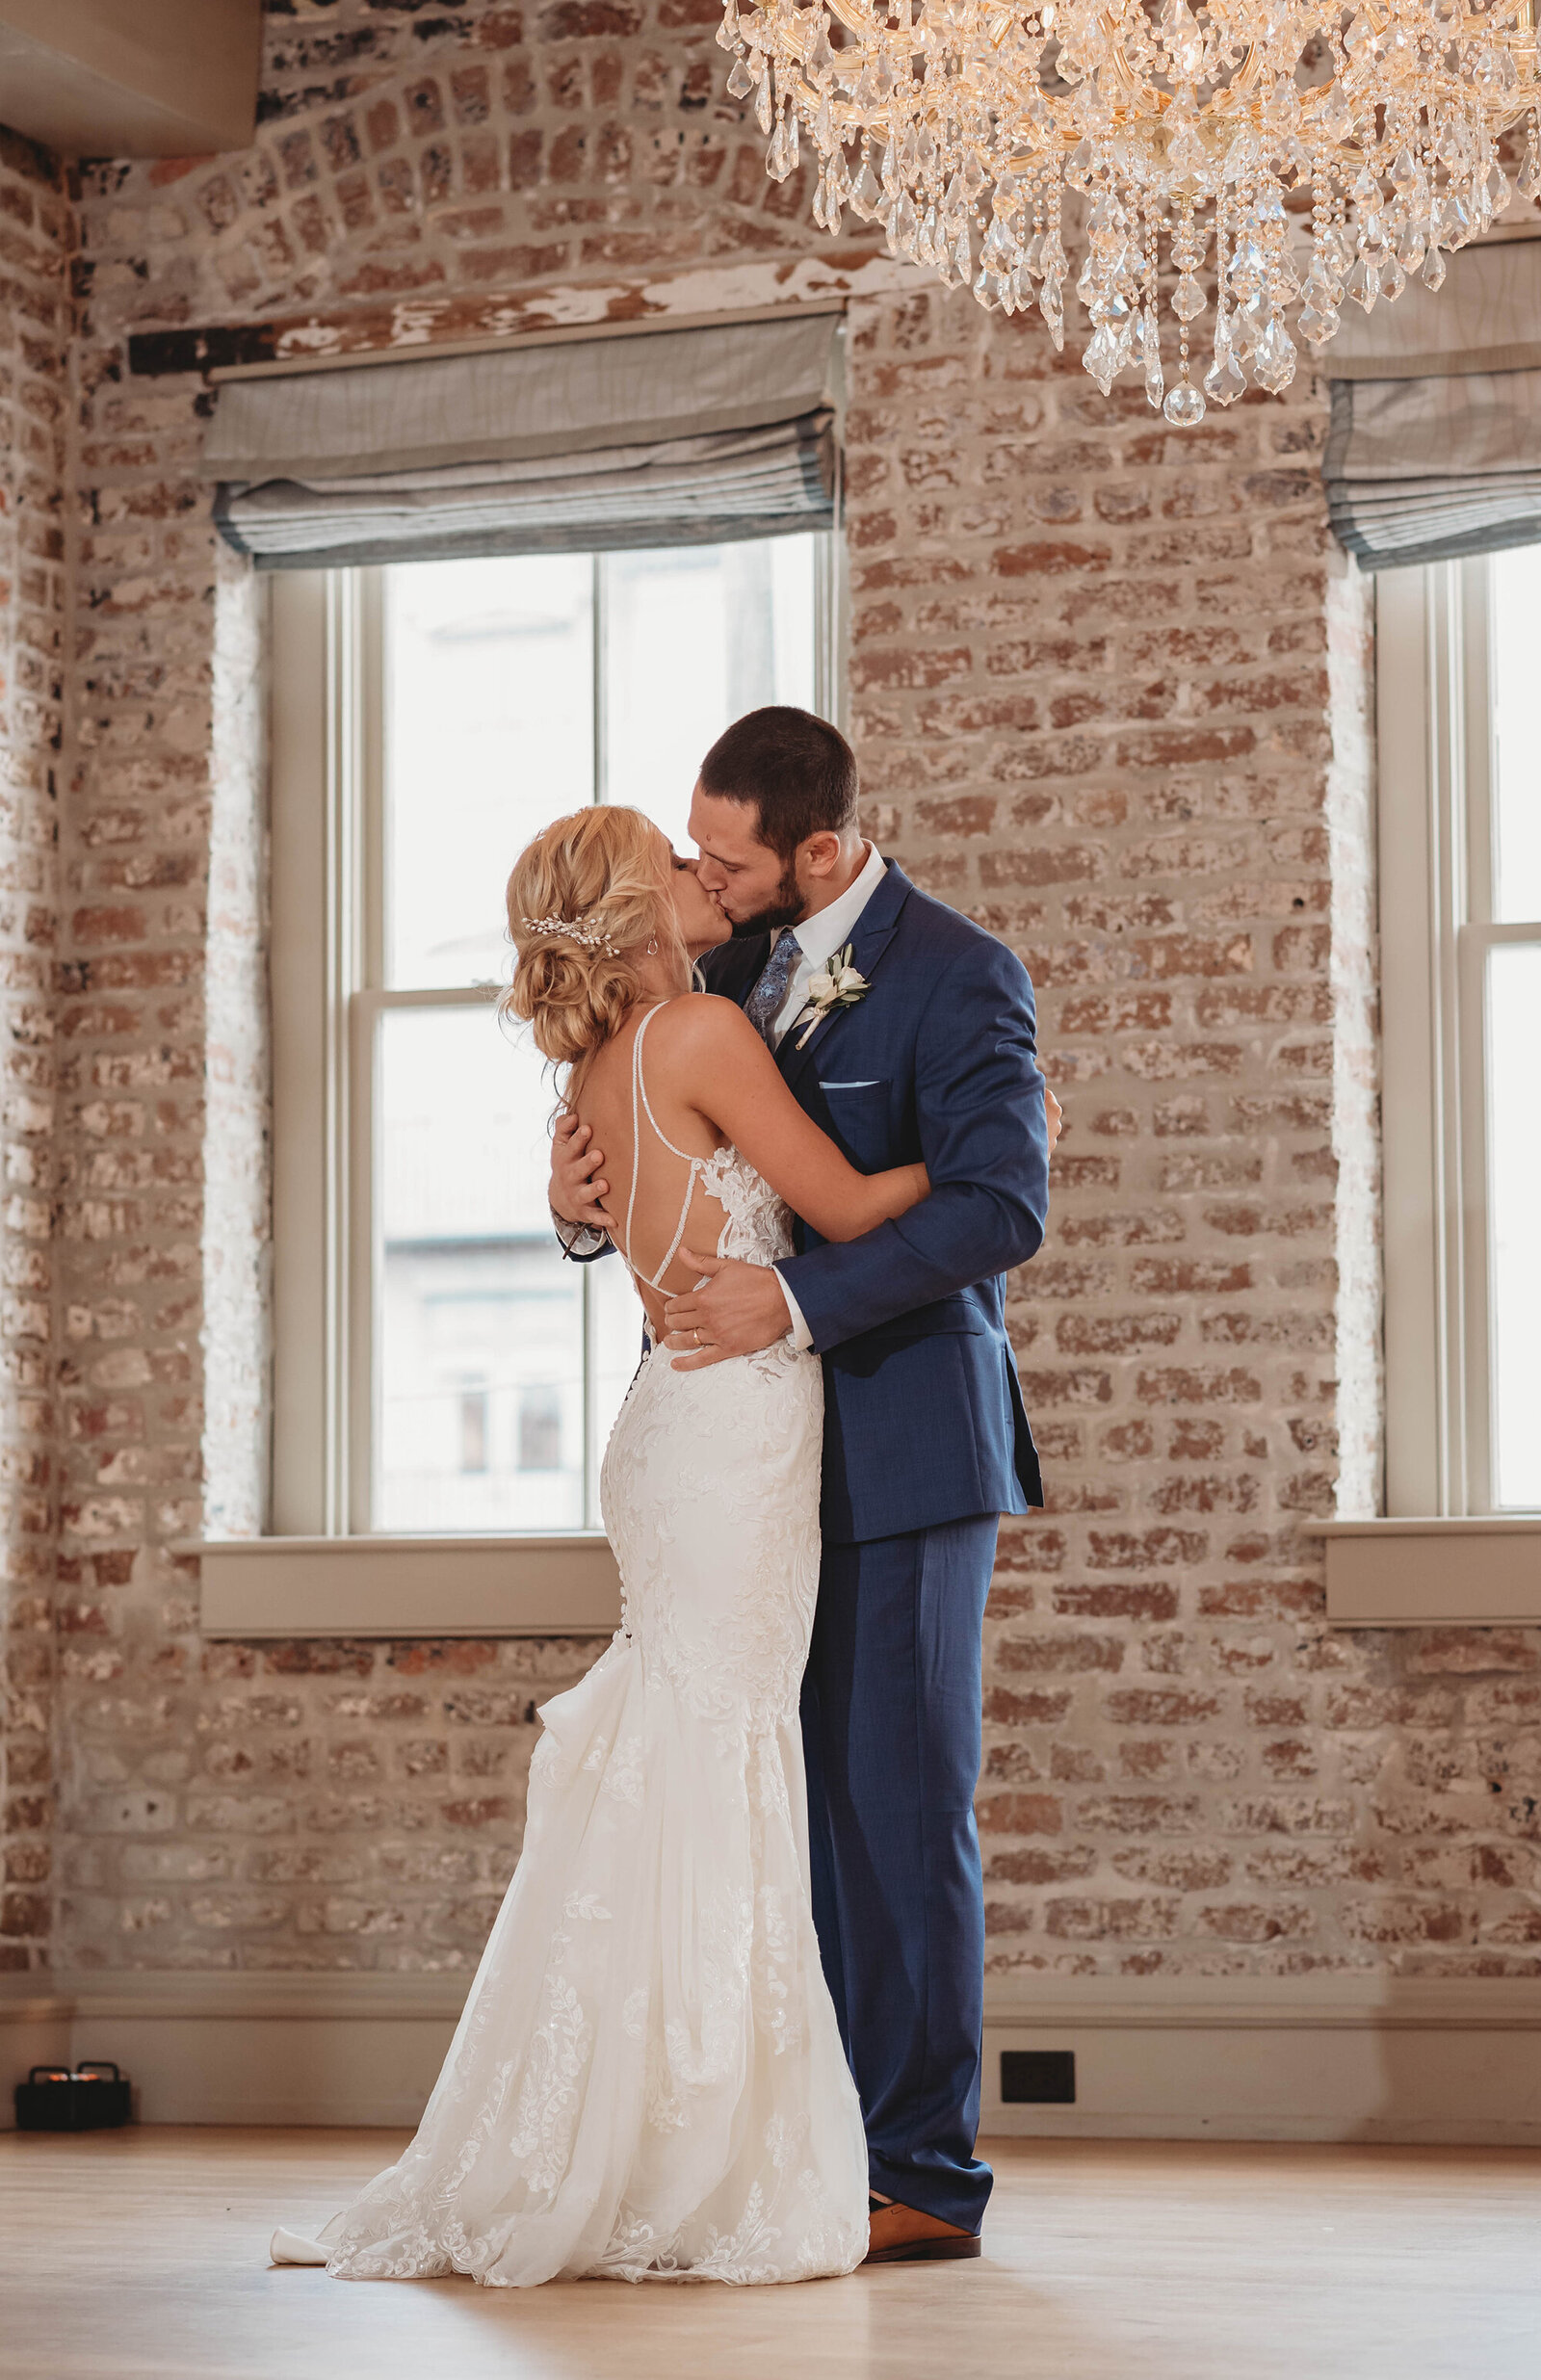 First Dance after Elopement in Charleston, SC.